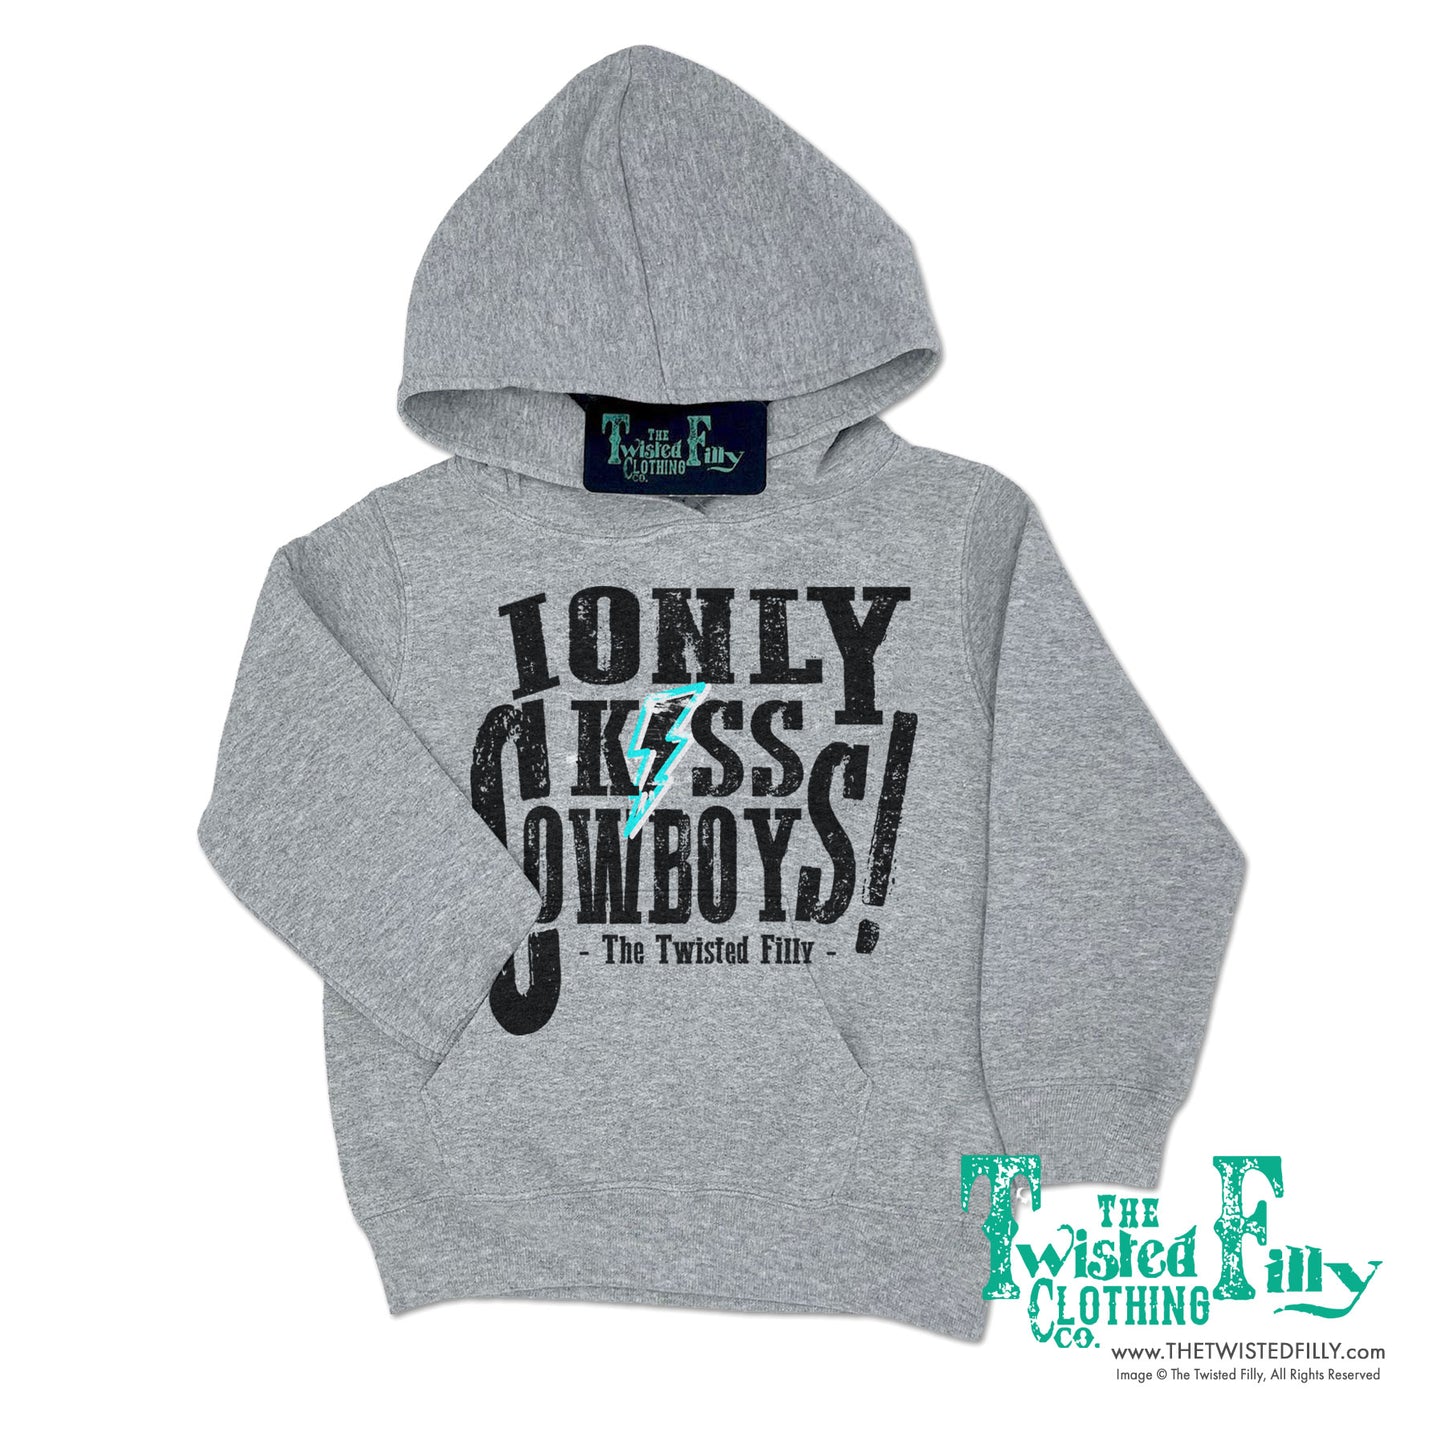 I Only Kiss Cowboys - Adult Women's Hoodie - Gray